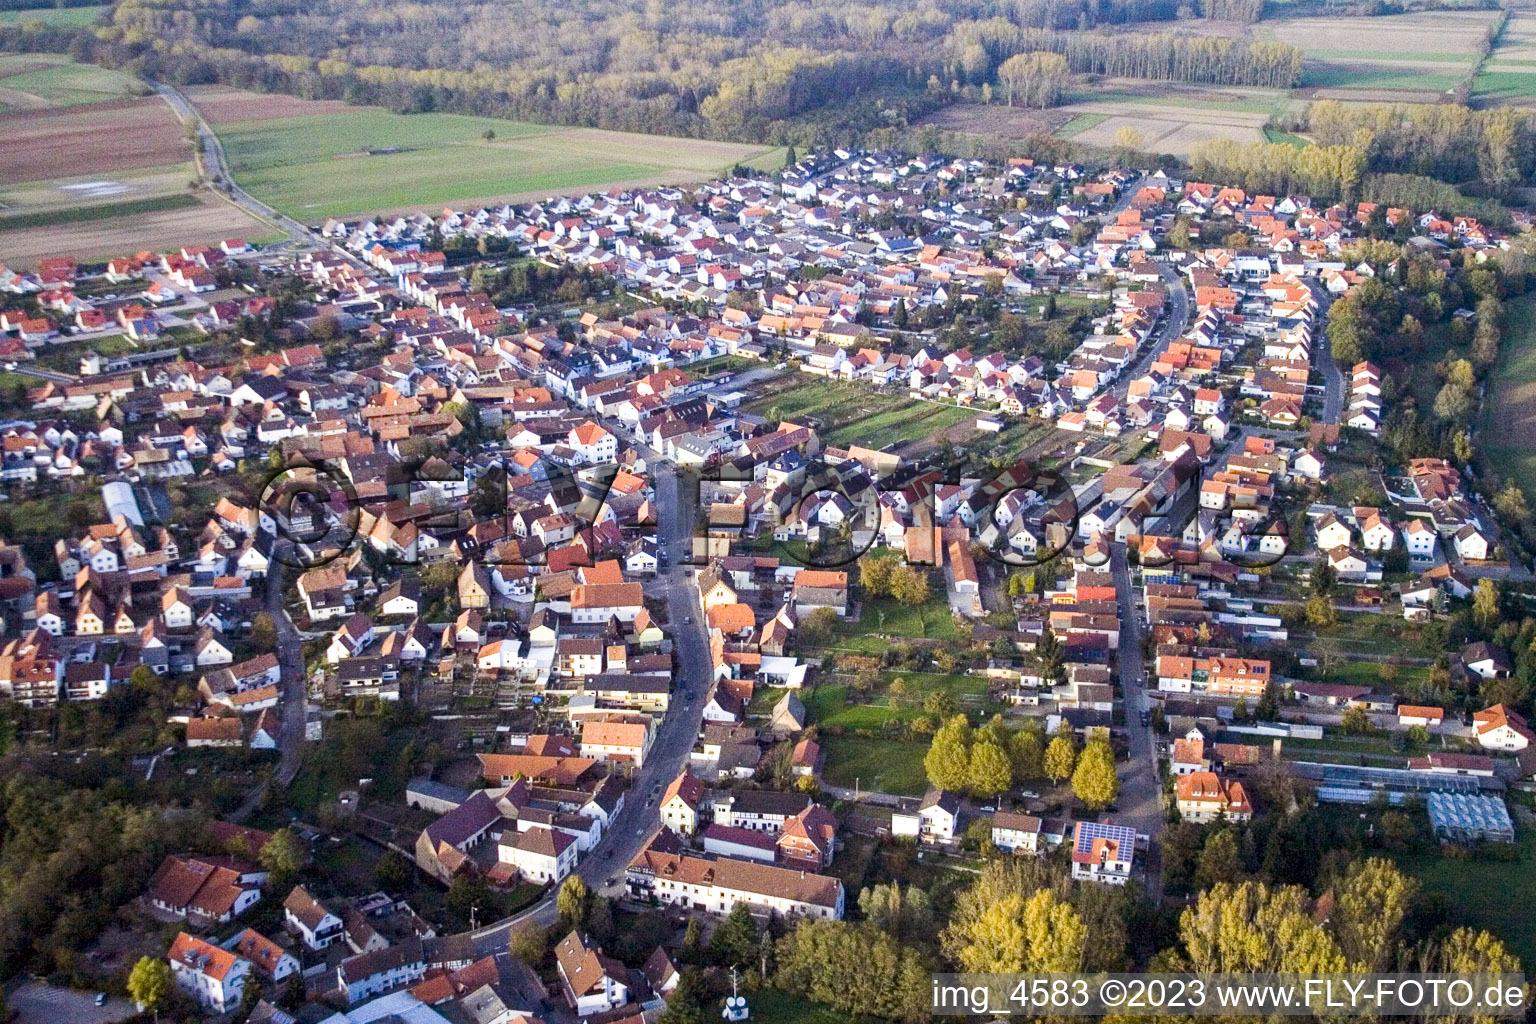 Aerial view of From the southeast in Hördt in the state Rhineland-Palatinate, Germany